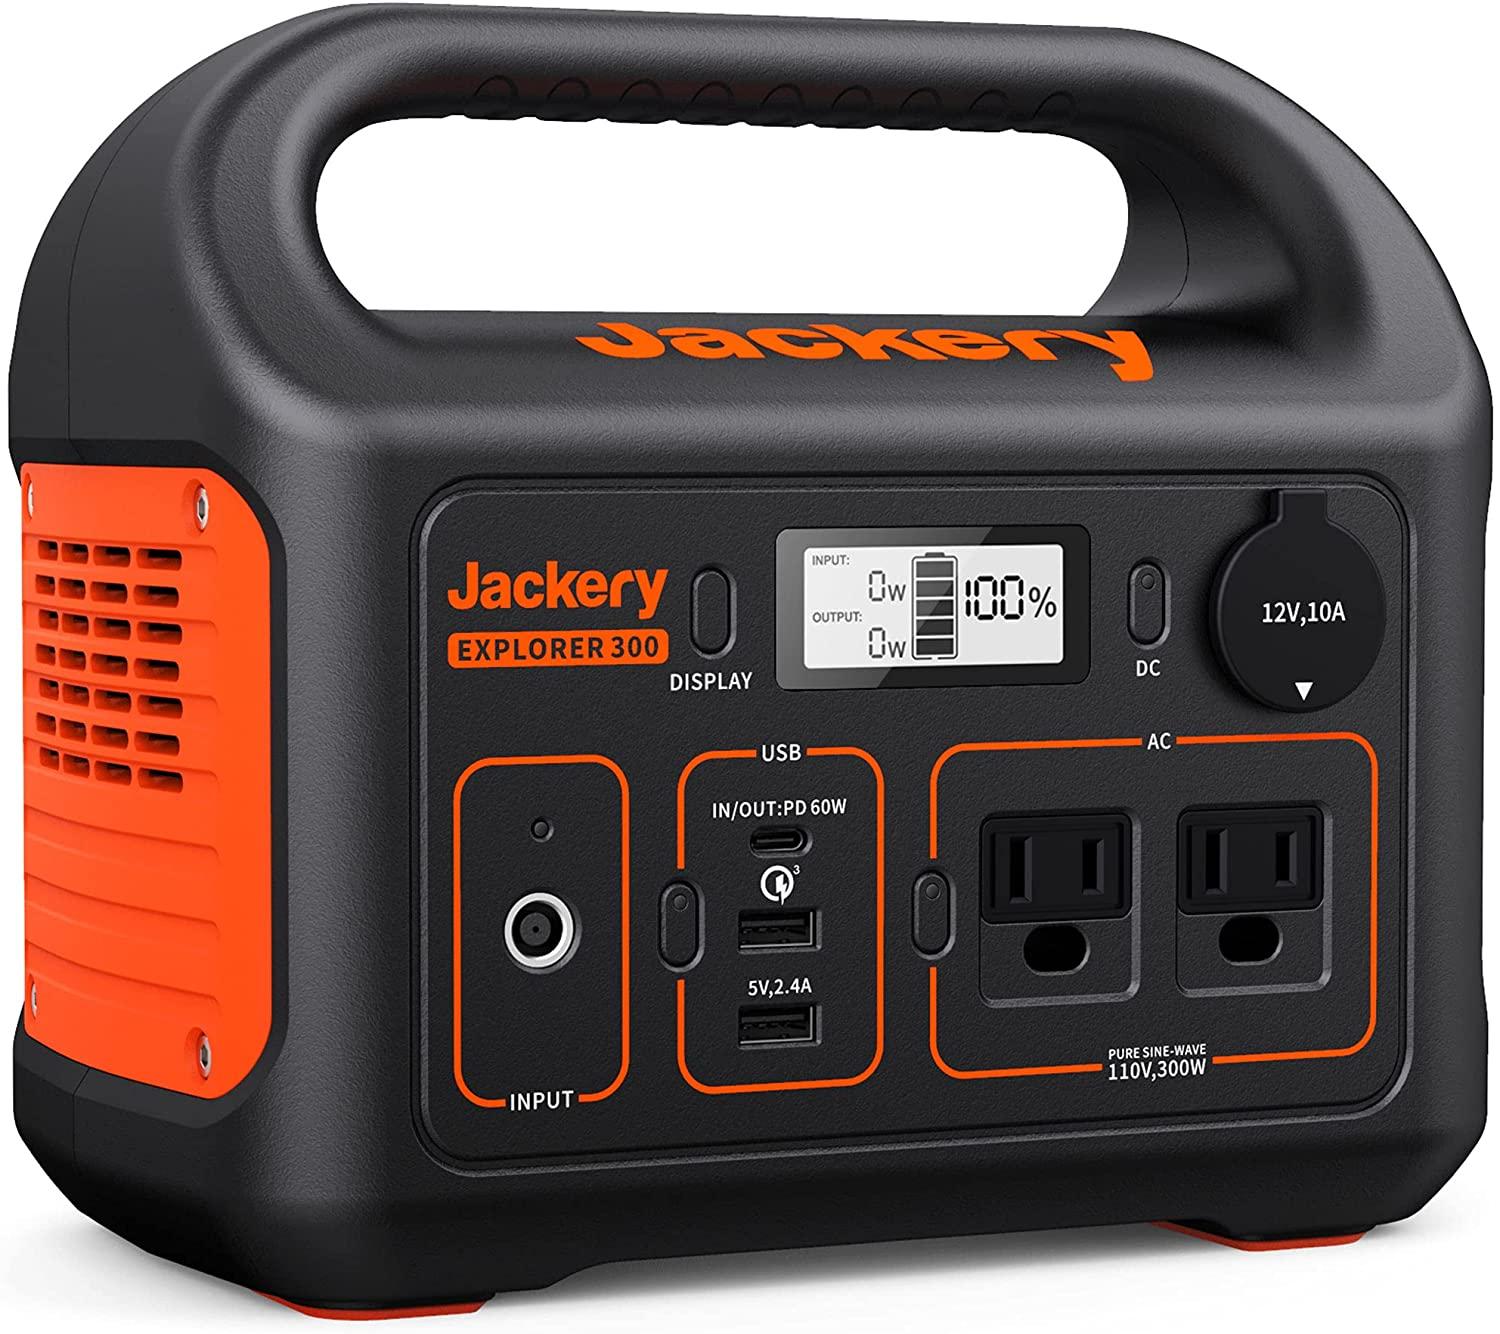 Jackery Explorer 300 293Wh Portable Power Station for $209.99 Shipped